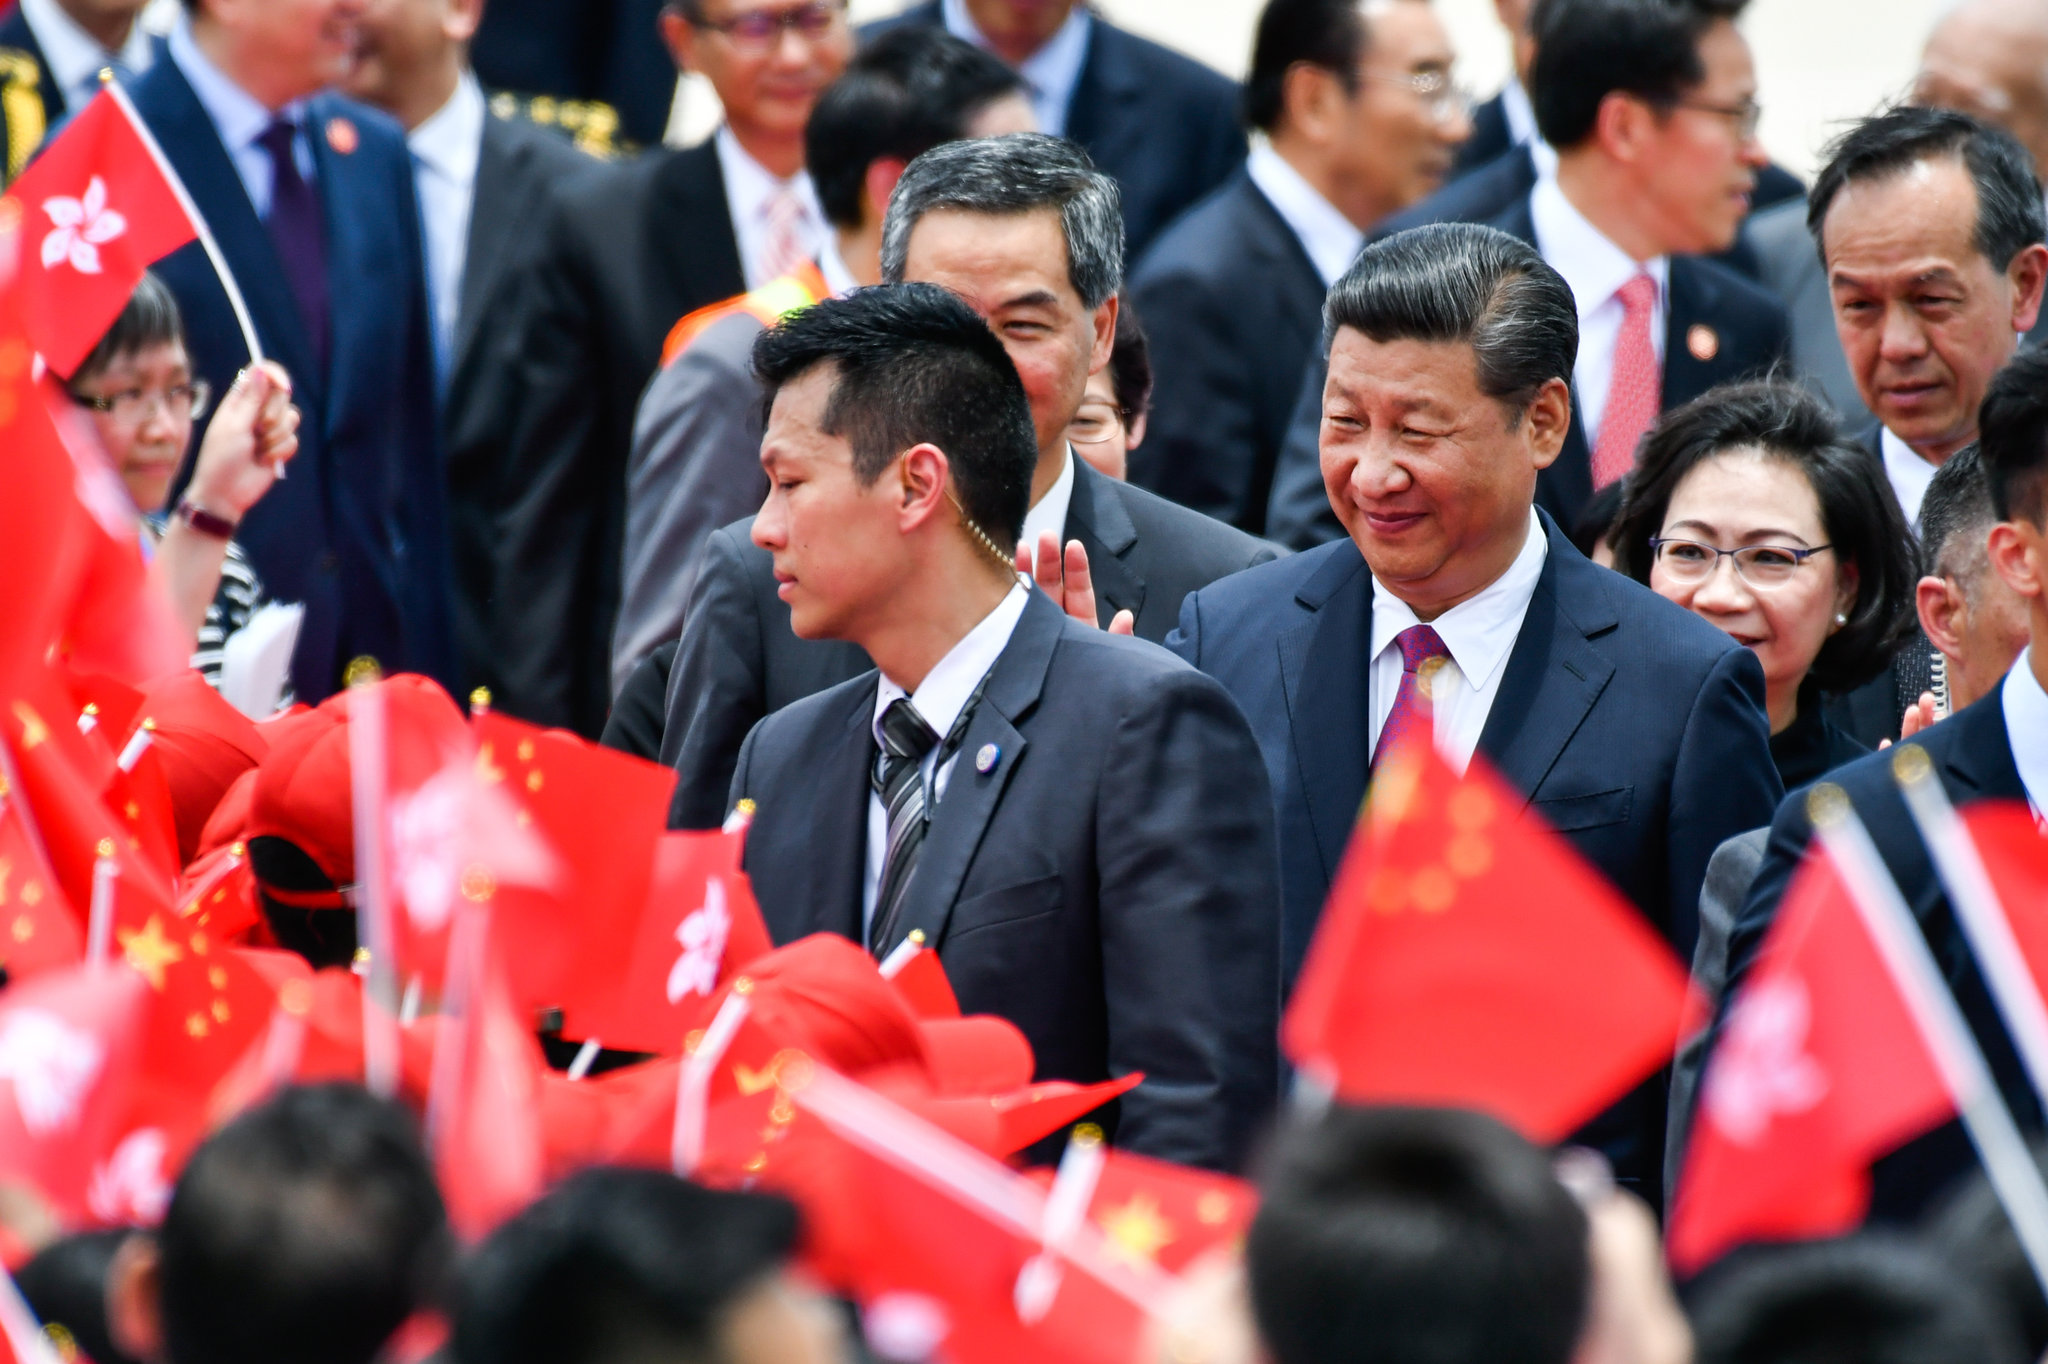 Xi: Challenges to Beijing in HK “Absolutely Impermissible”